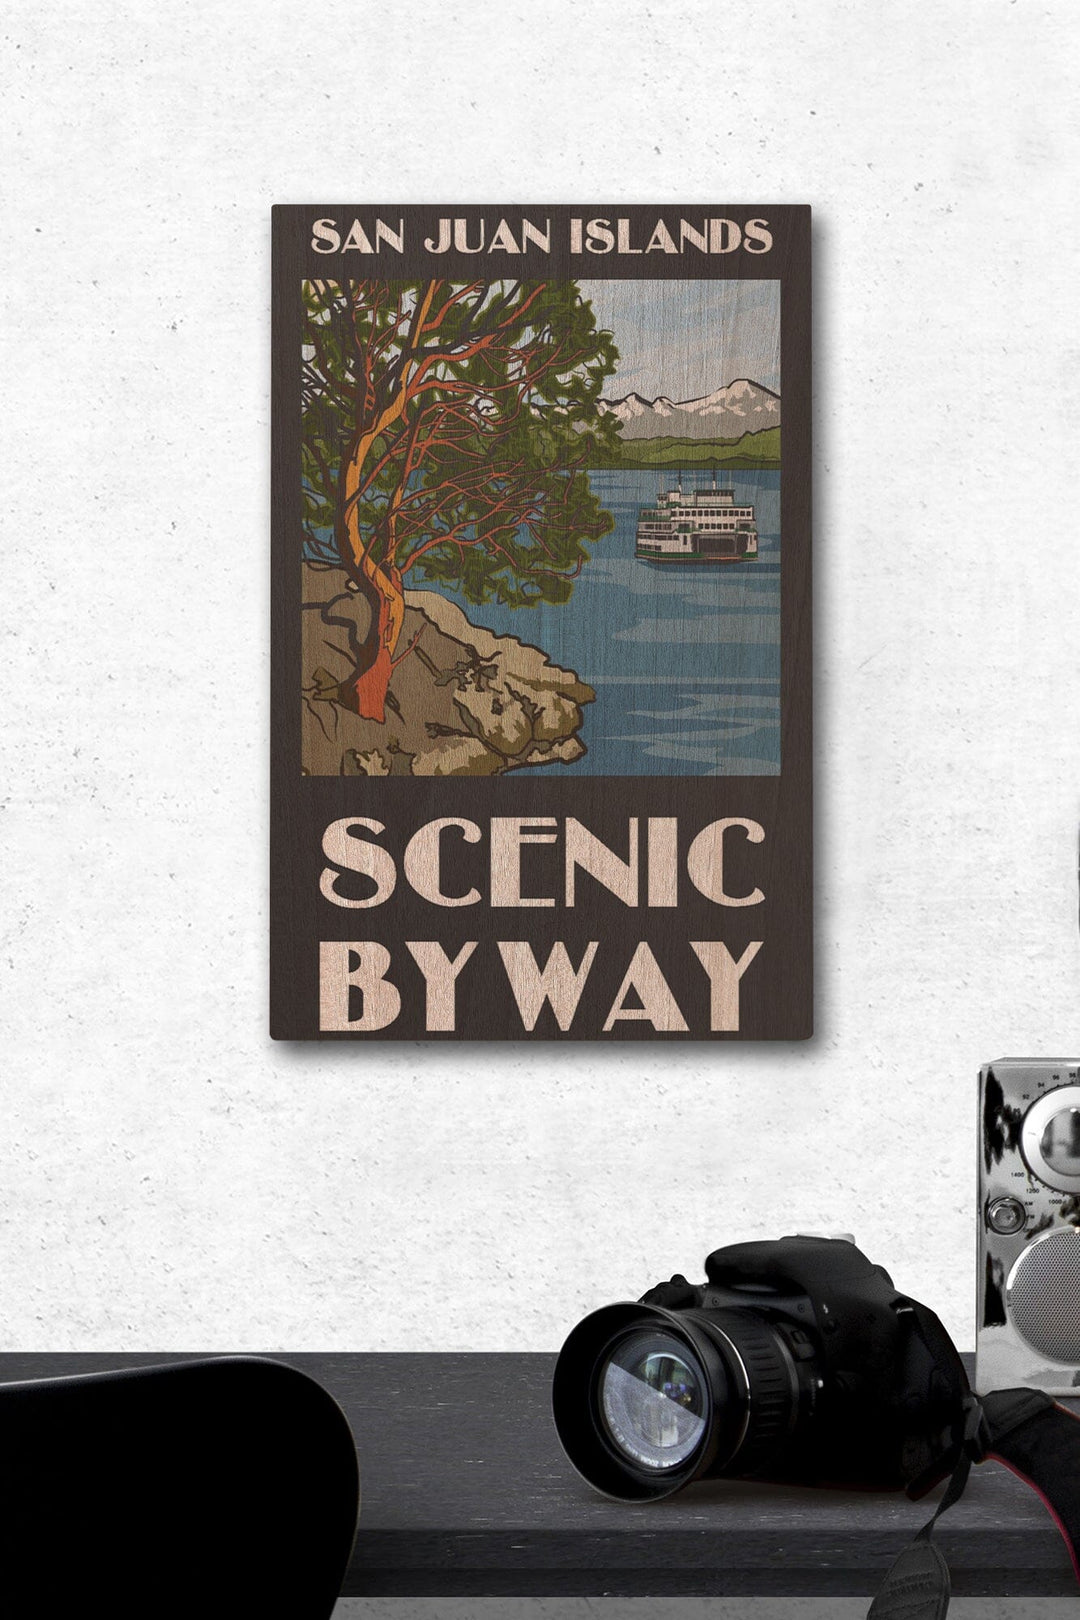 San Juan Islands Scenic Byway, Washington, Official Logo, Wood Signs and Postcards Wood Lantern Press 12 x 18 Wood Gallery Print 